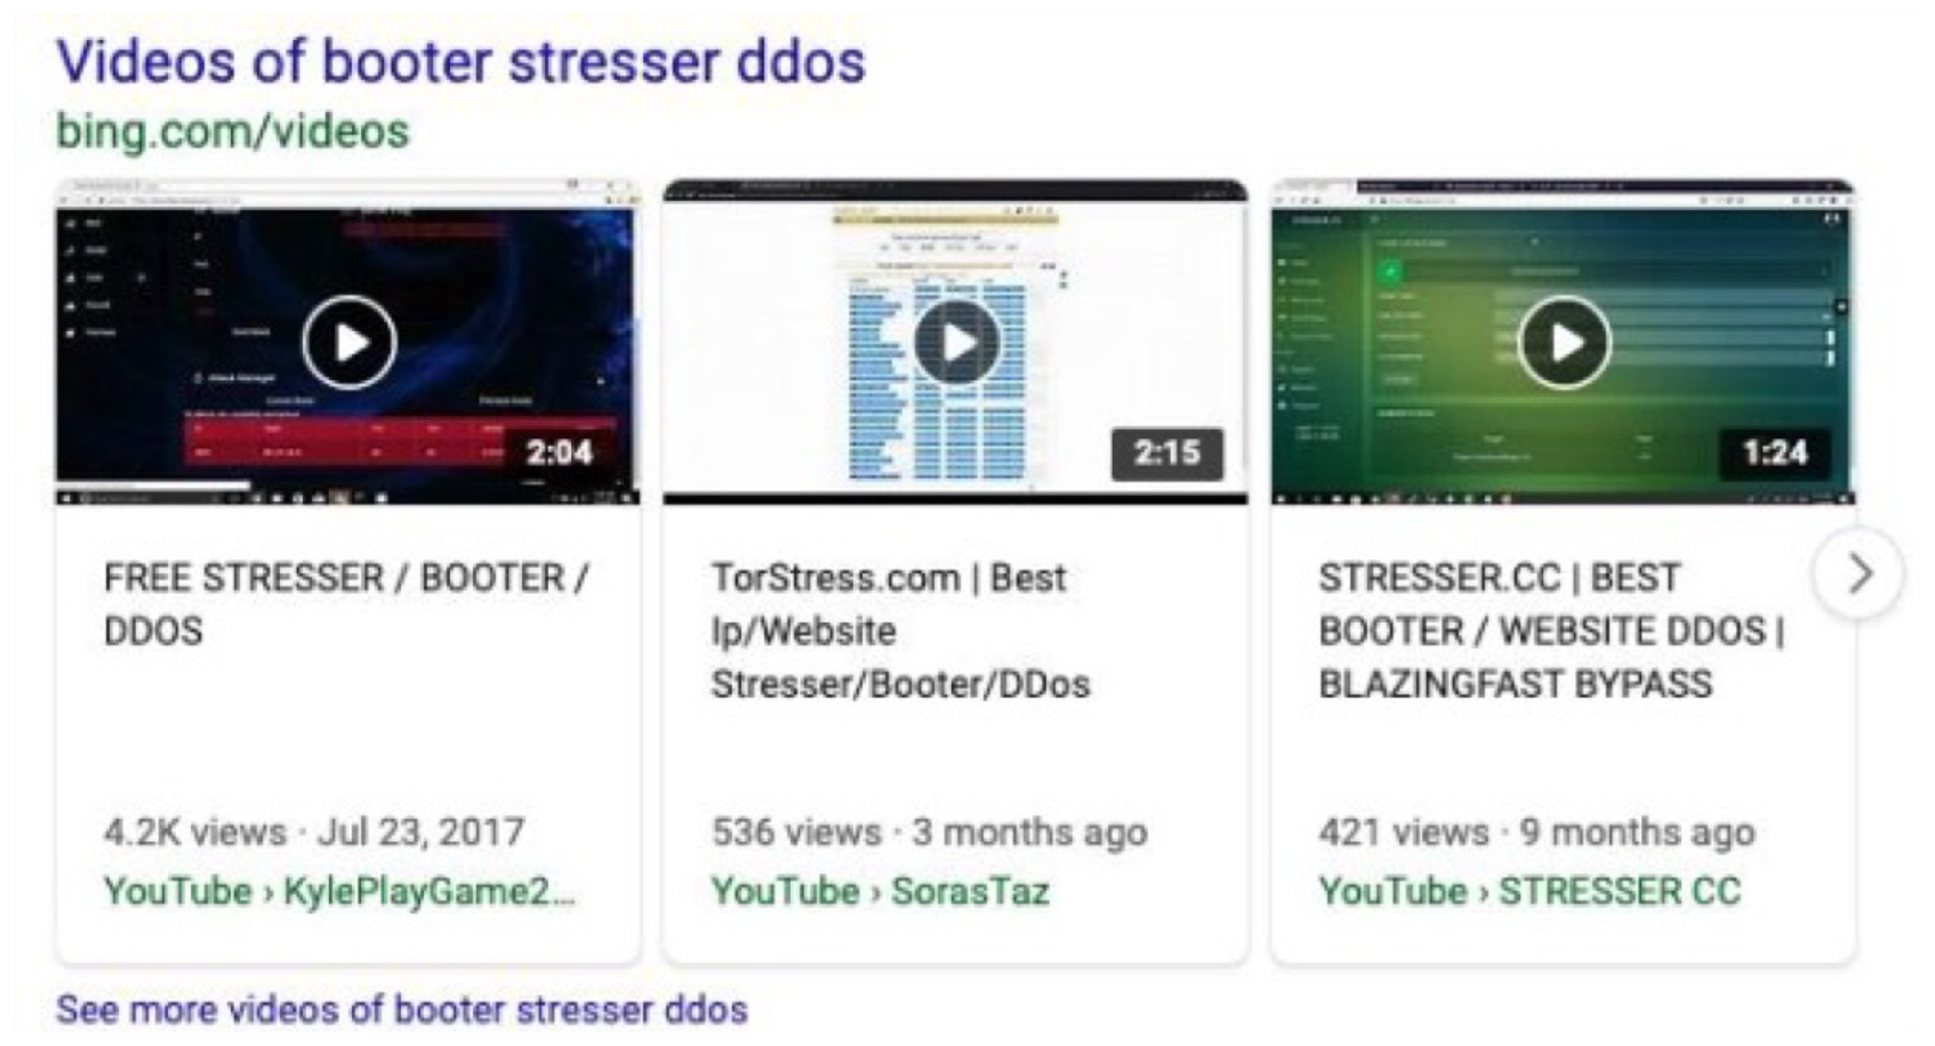 Booter videos on first search result page